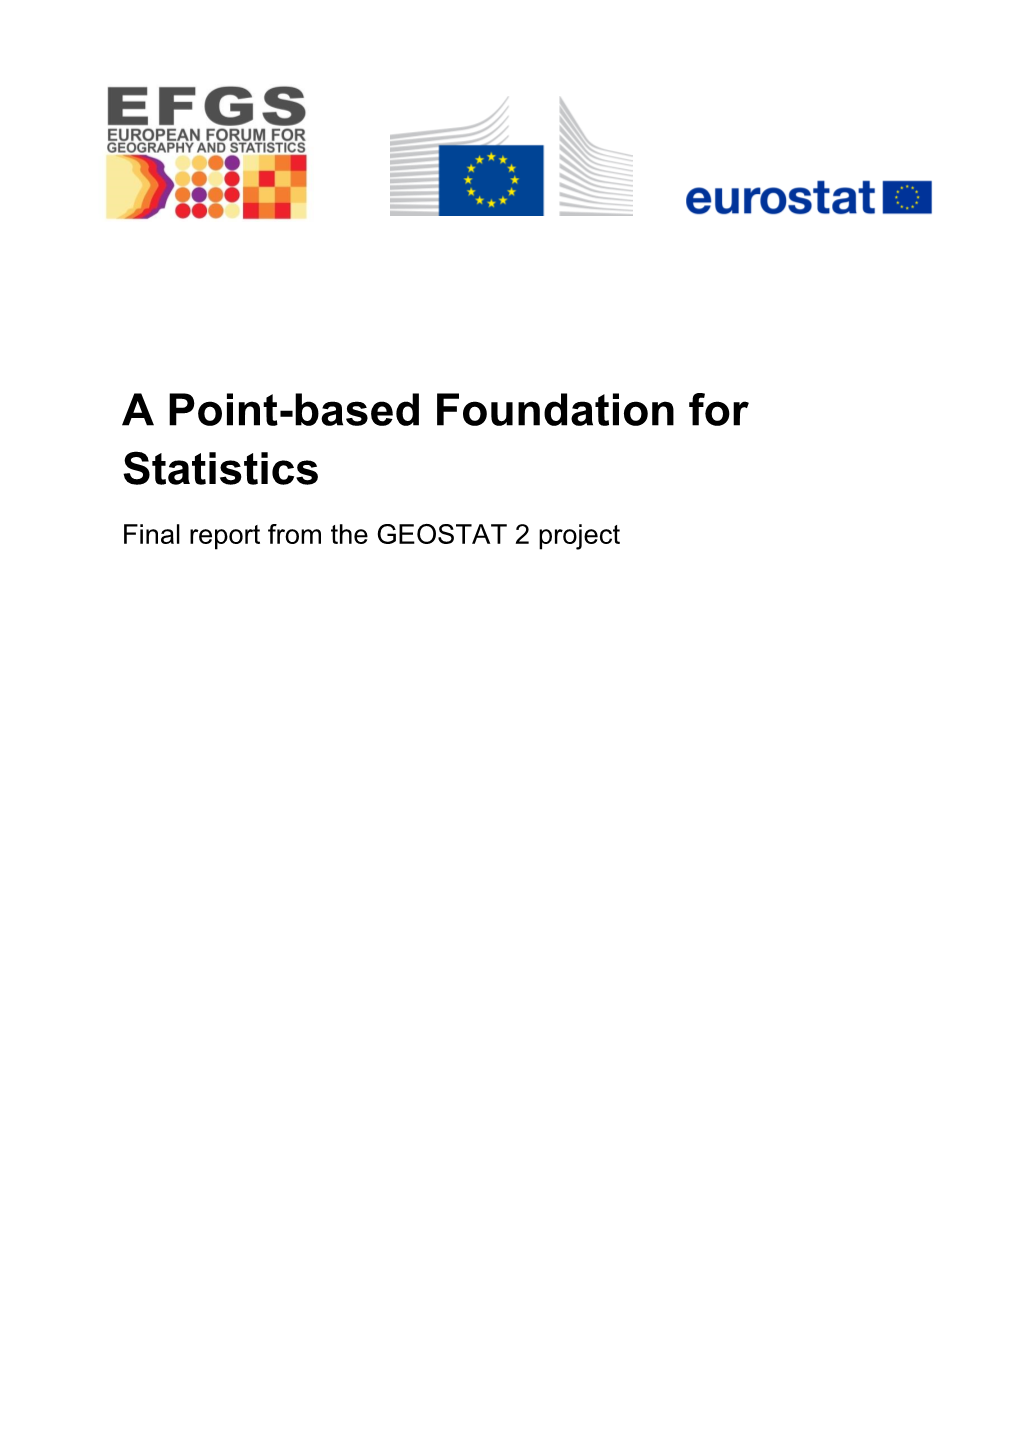 A Point-Based Foundation for Statistics